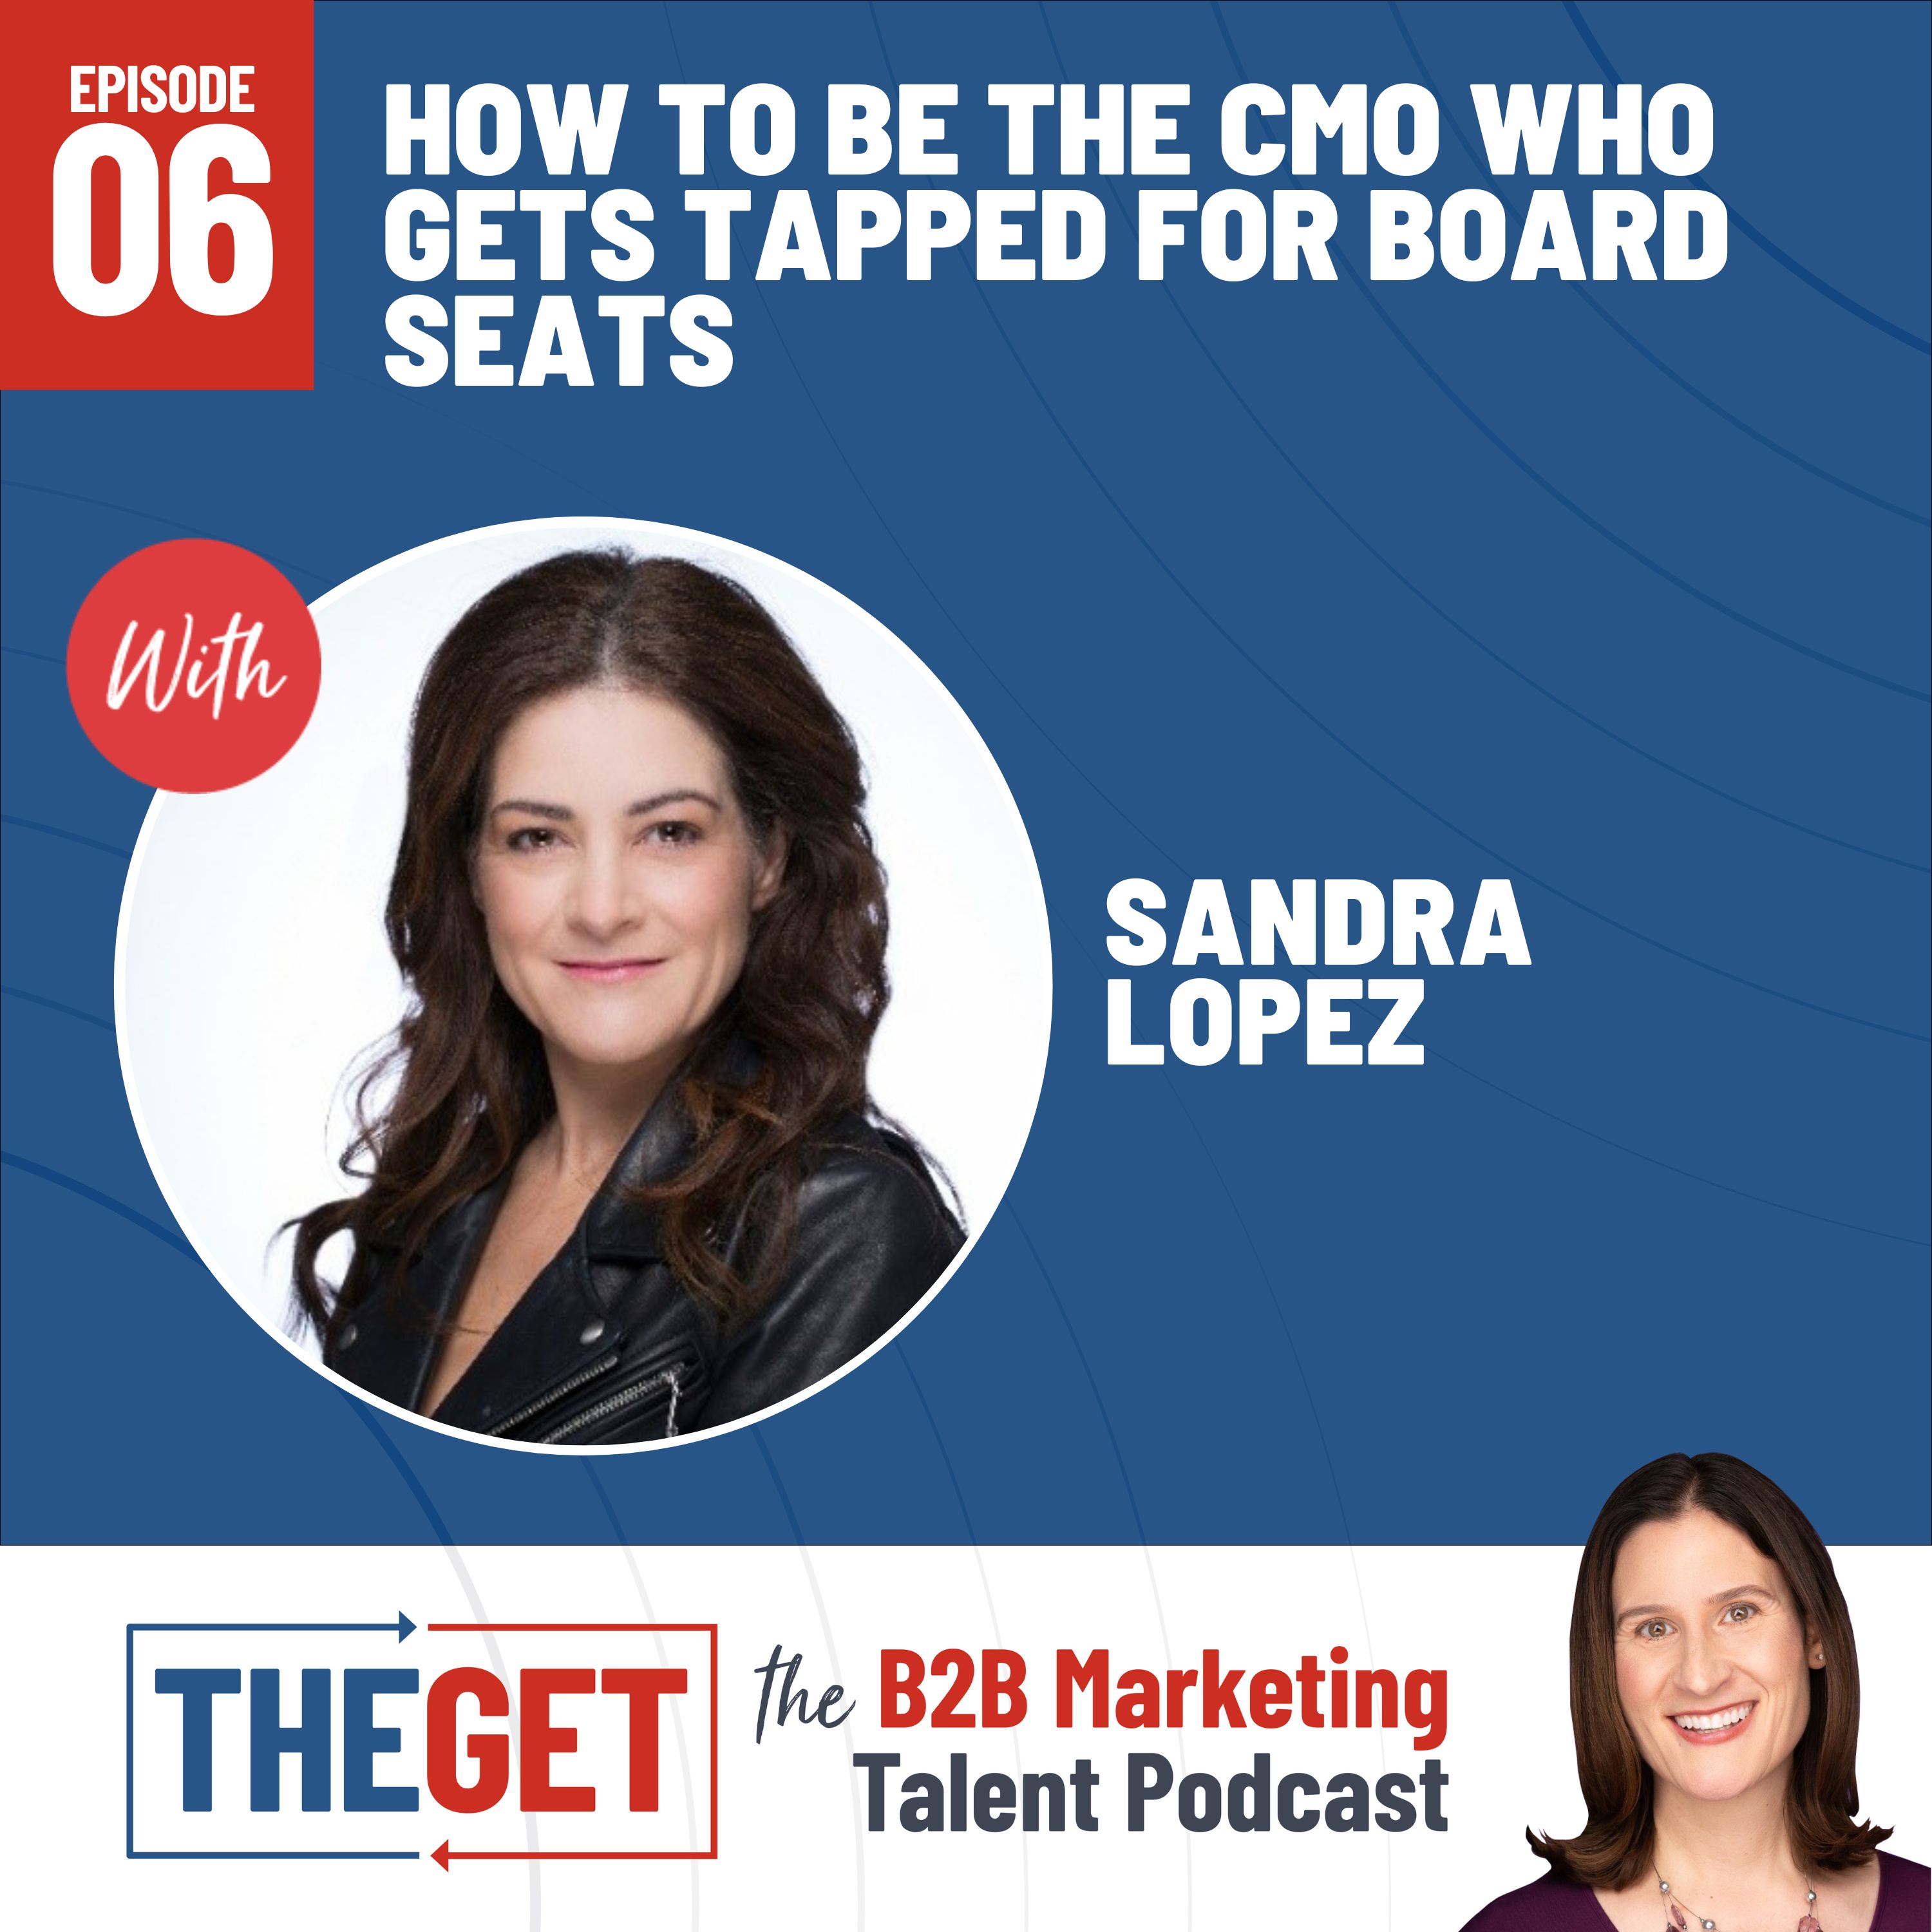 Artwork for podcast The Get: Finding And Keeping The Best Marketing Leaders in B2B SaaS